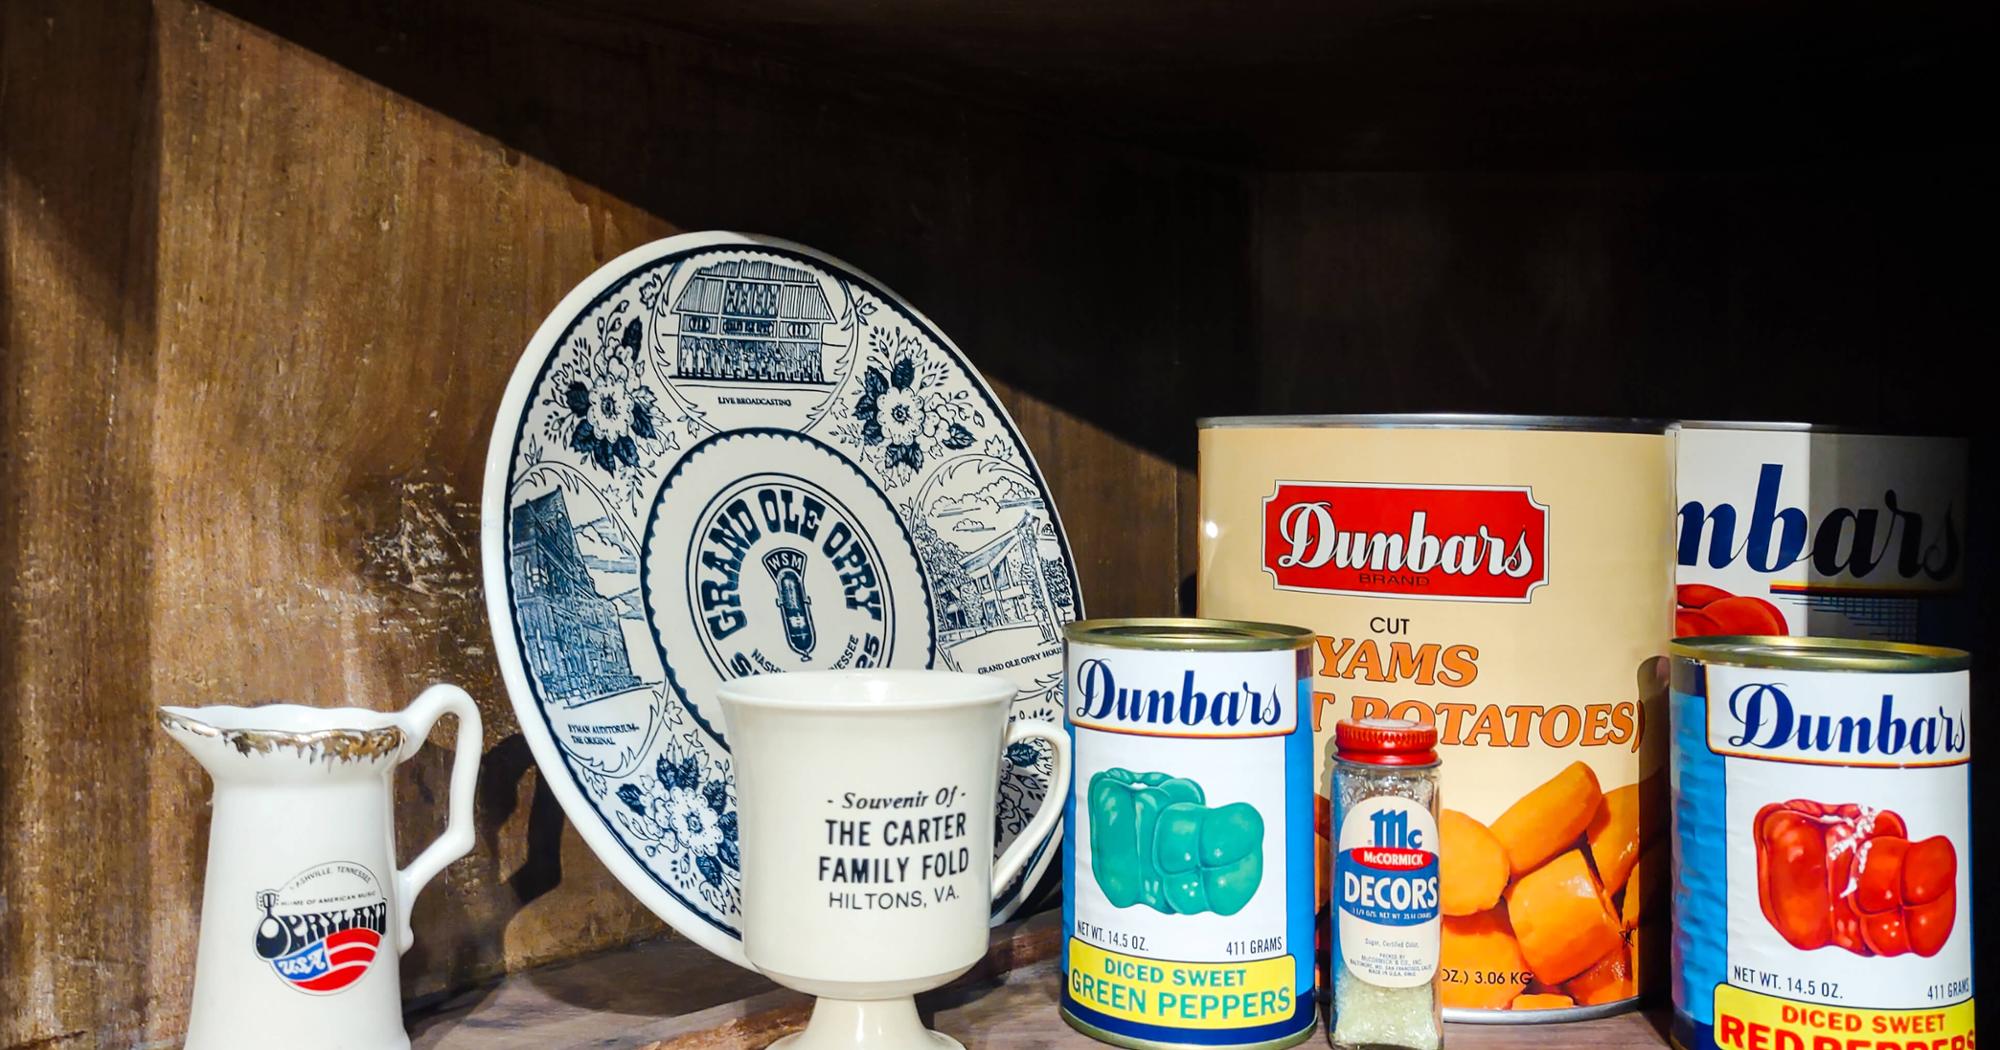 Image artifacts inside a cabinet, including canned yams, canned diced sweet red peppers, and a Grand Ole Opry plate.